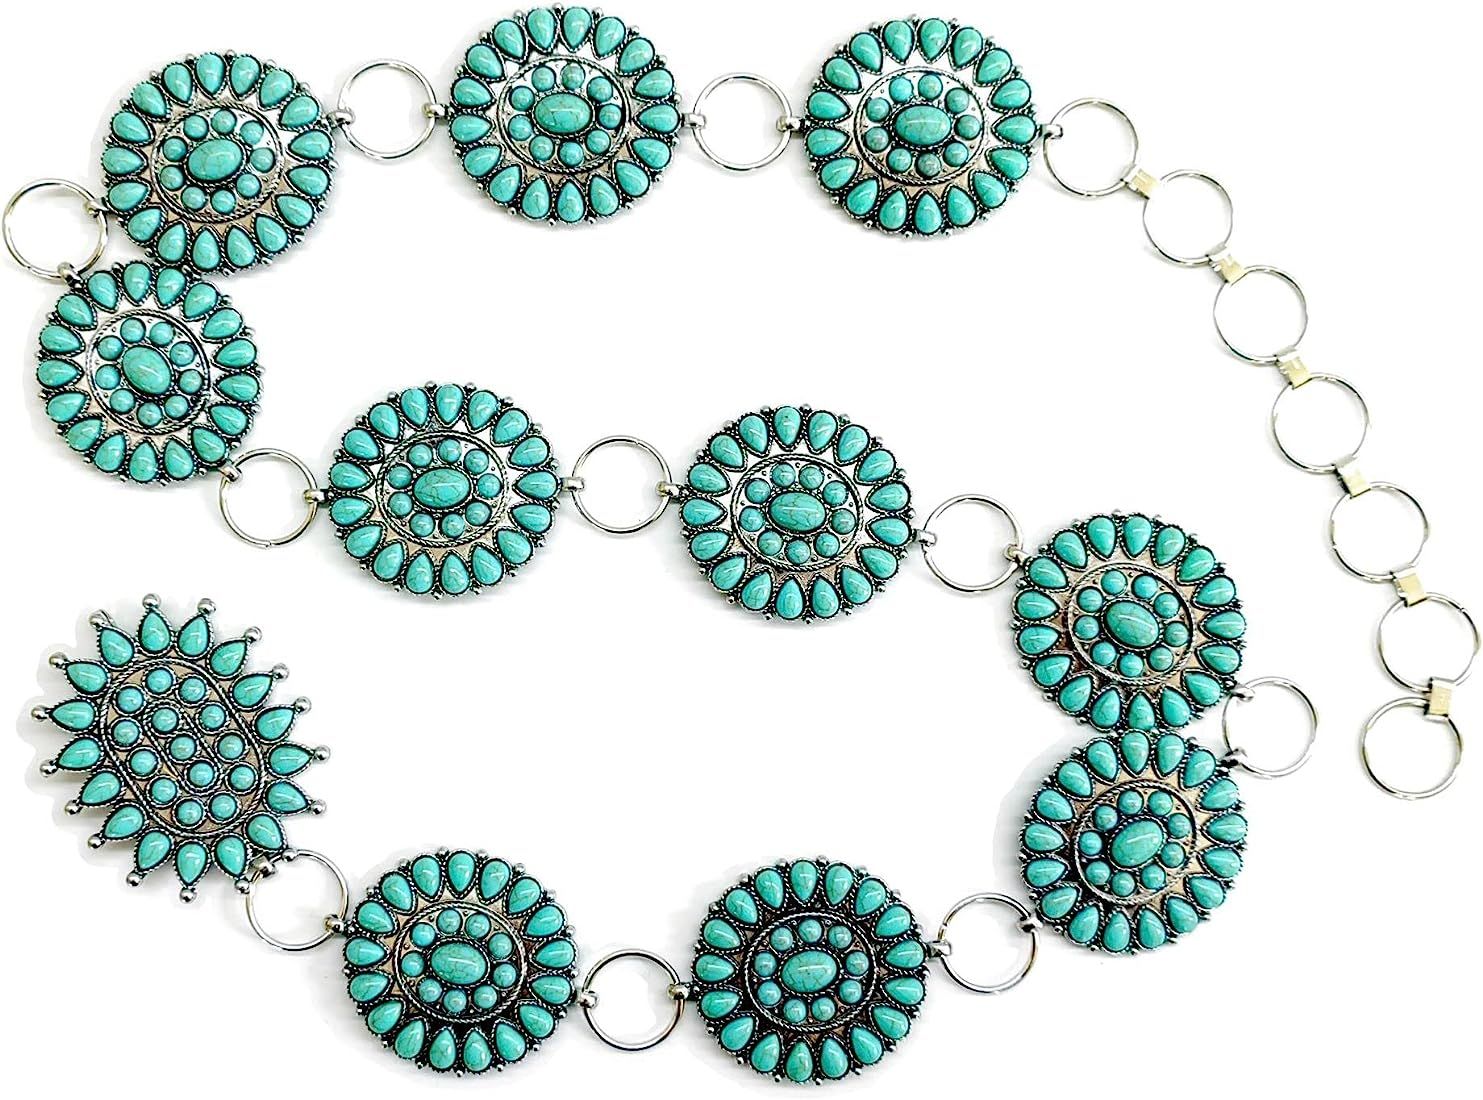 Women's Western Cowgirl Turquoise Stone Concho Metal Chain Belt 4 sizes S/M/L/XL | Amazon (US)